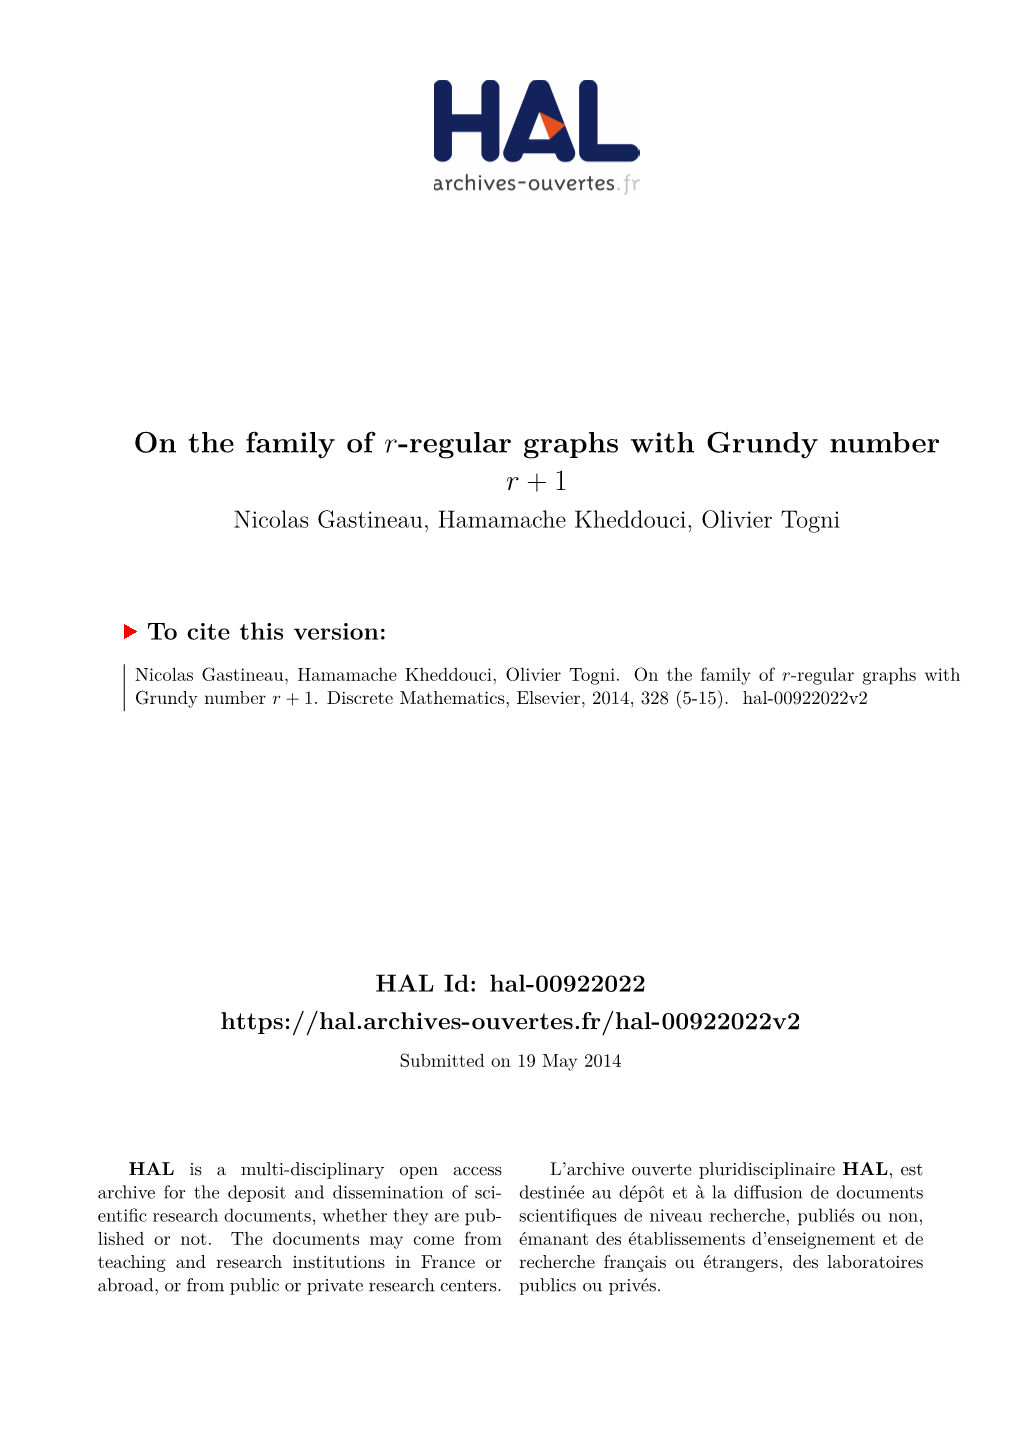 On the Family of R-Regular Graphs with Grundy Number R + 1 Nicolas Gastineau, Hamamache Kheddouci, Olivier Togni